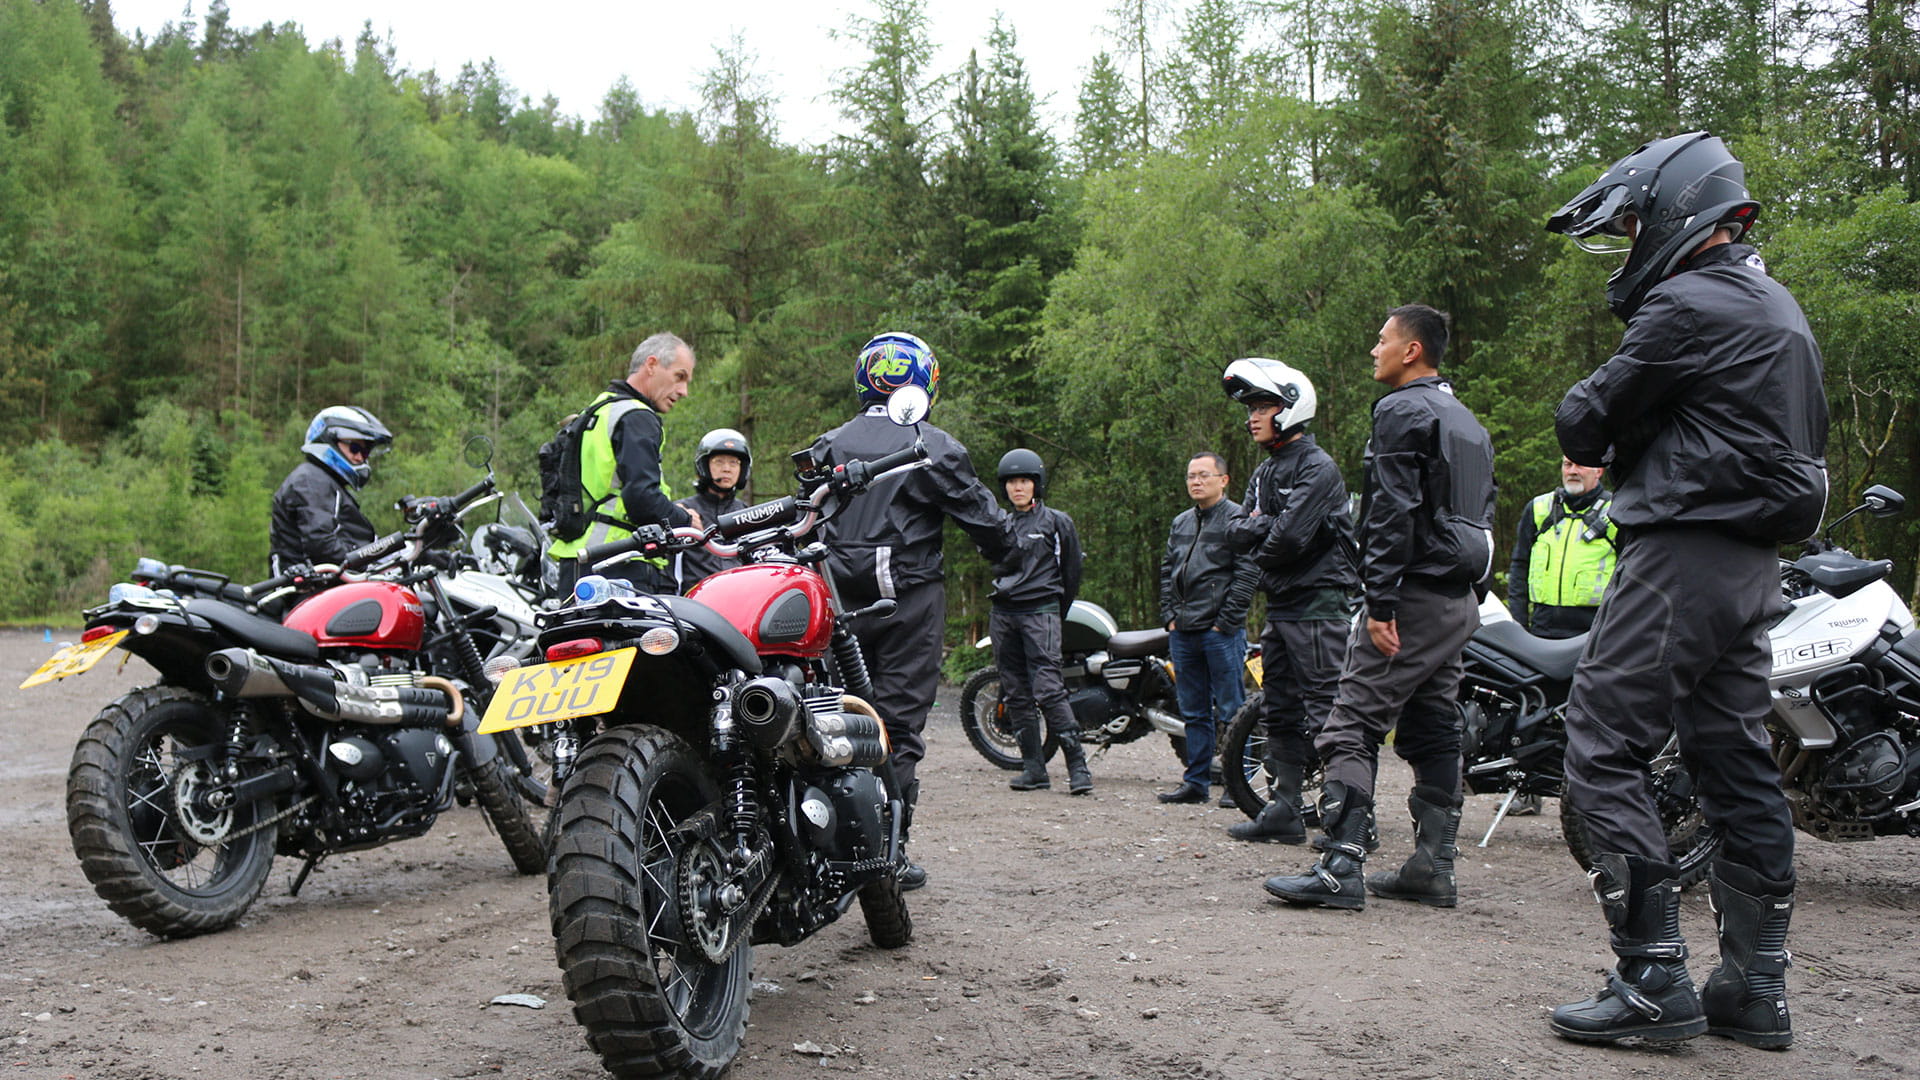 The training stage for Triumph Adventure course on Scrambler 1200 and the Tiger range